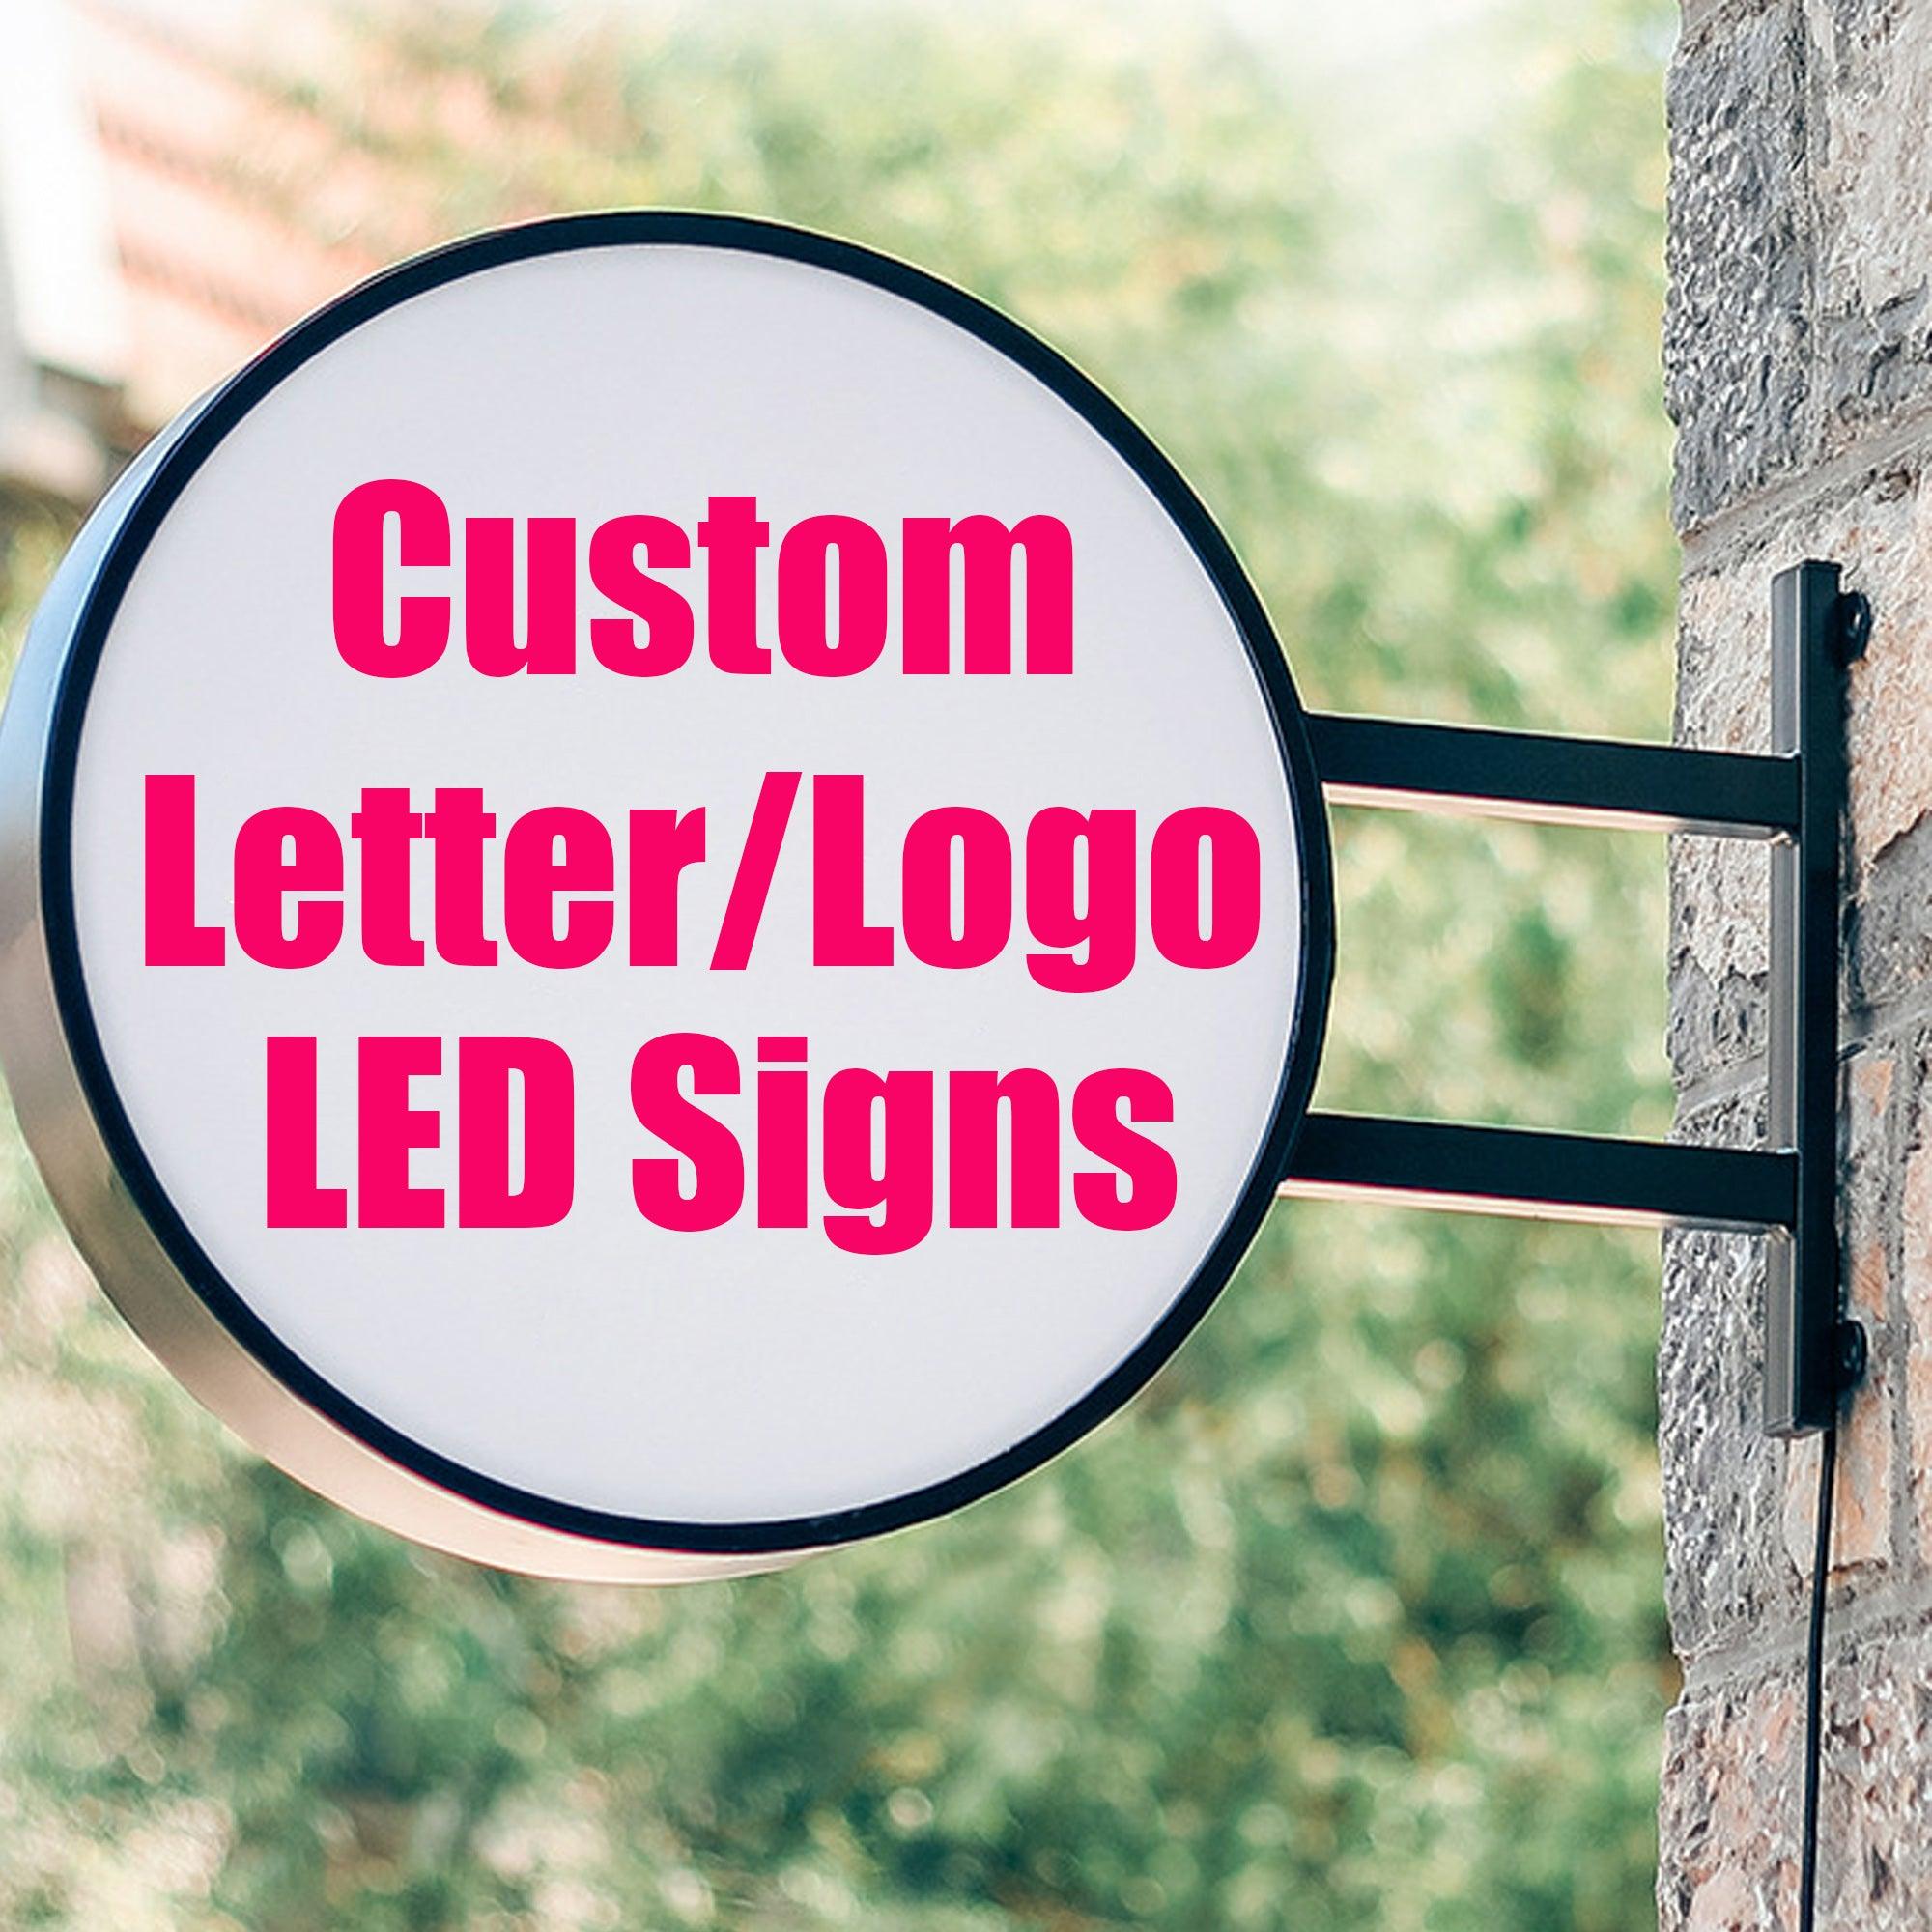 Custom LED Light Box Sign Board, Custom Round Light Box Store Front Sign, Personalized LED Light LOGO Box for Home Party Birthday Wedding Gifts Letter Shop Bar Cafe Beauty Nail Salon Decor - CustomizeFactory